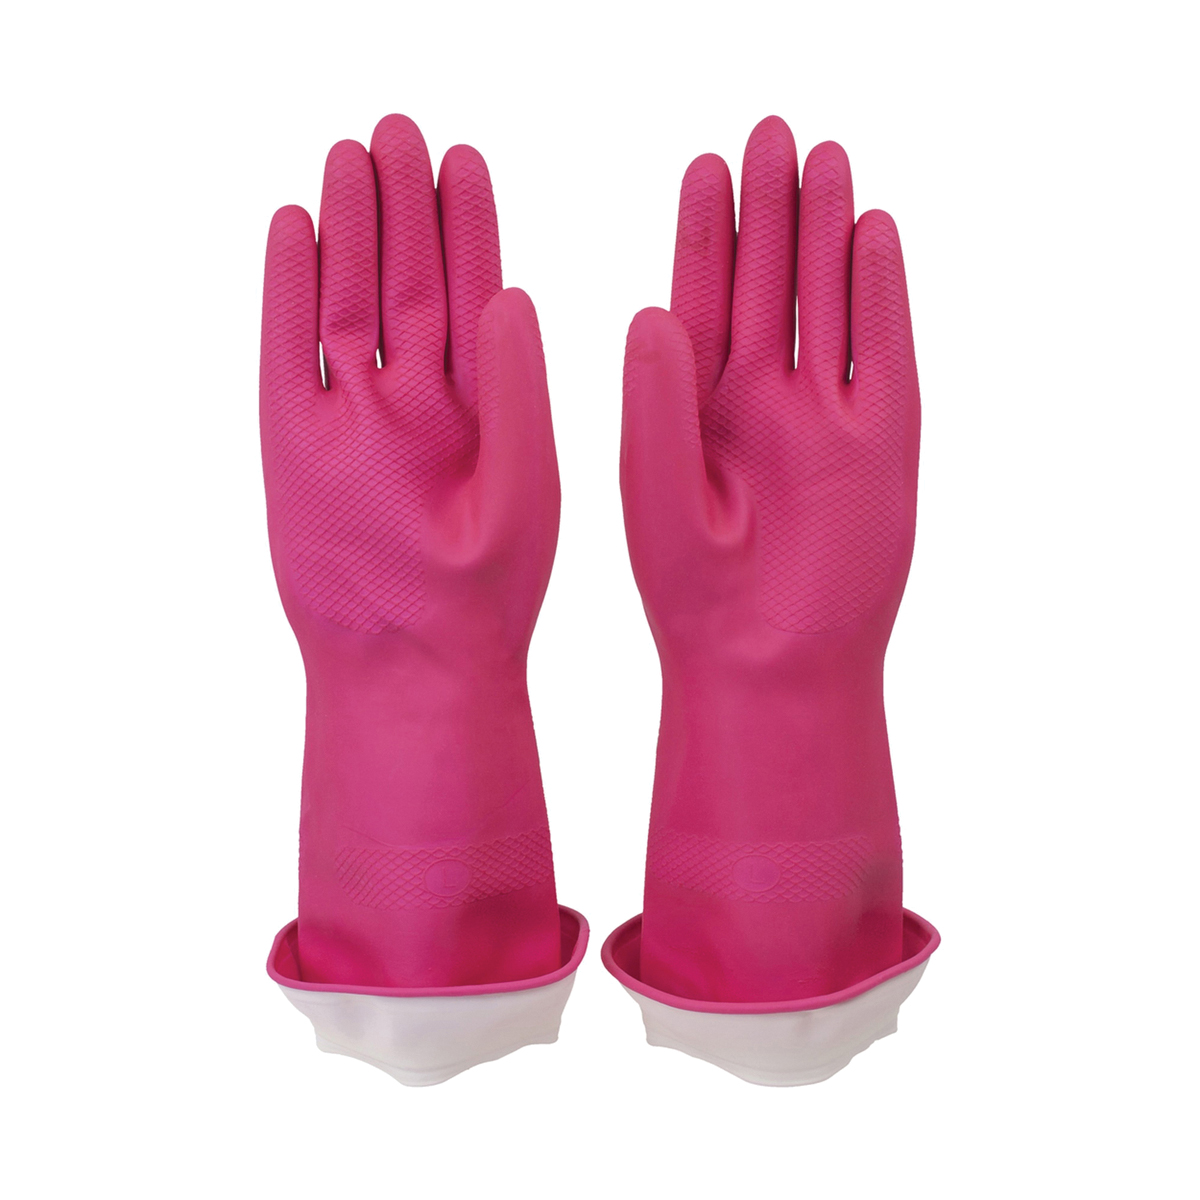 Casabella WaterBlock 46050 Cleaning Gloves, M, Latex, Pink - 2